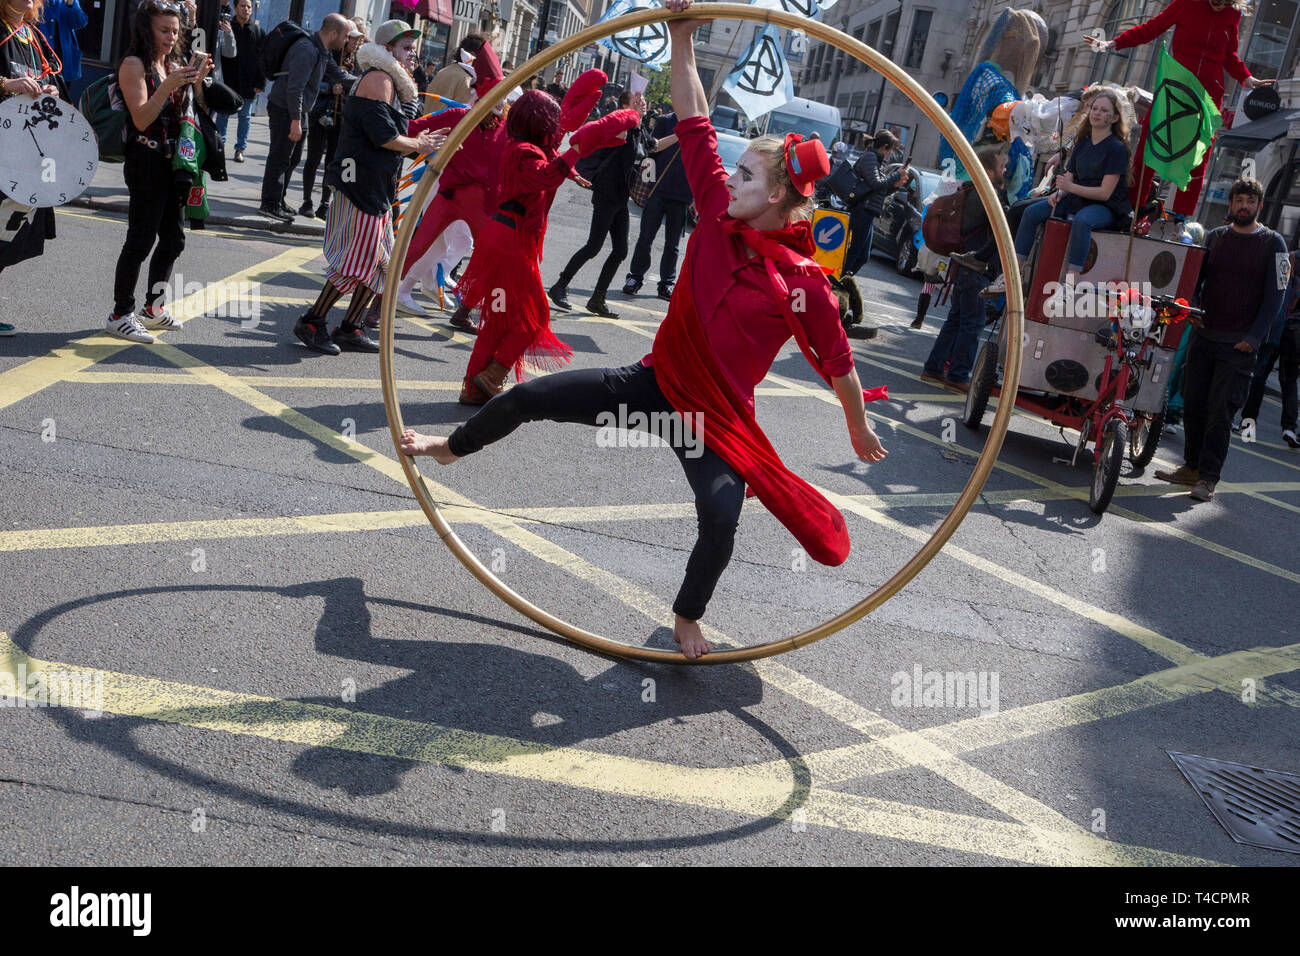 Climate Change protesting acrobats with Extinction Rebellion block central London and simultaneously stop traffic across the capital including Marble Arch, Piccadilly Circus, Waterloo Bridge and roads around Parliament Square, on 15th April 2019, in London, England. Stock Photo